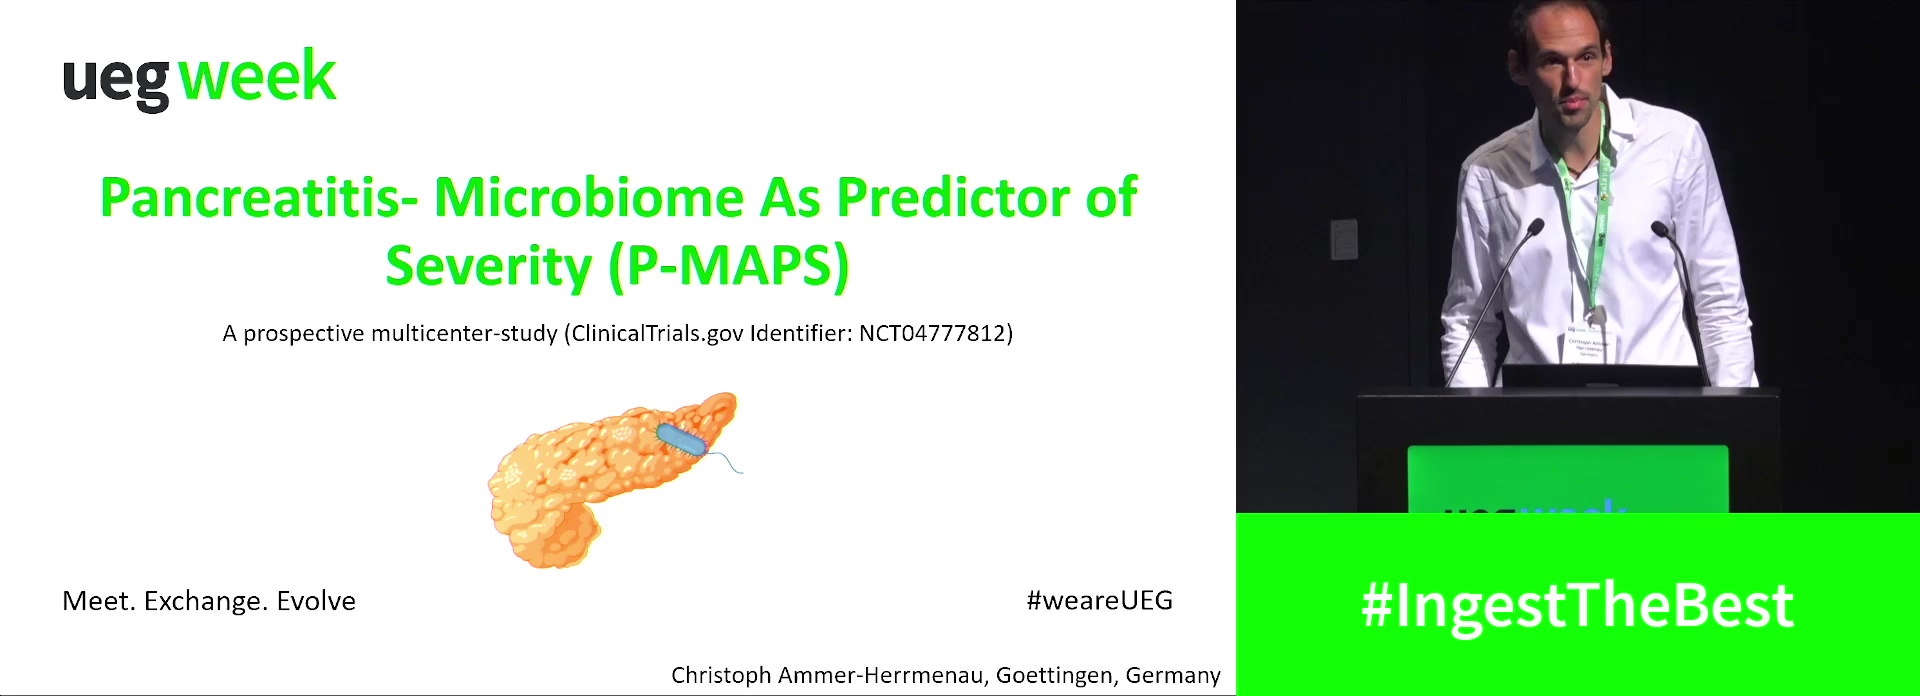 PANCREATITIS – MICROBIOME AS PREDICTOR OF SEVERITY (P-MAPS): A PROSPECTIVE INTERNATIONAL MULTICENTRE TRANSLATIONAL STUDY